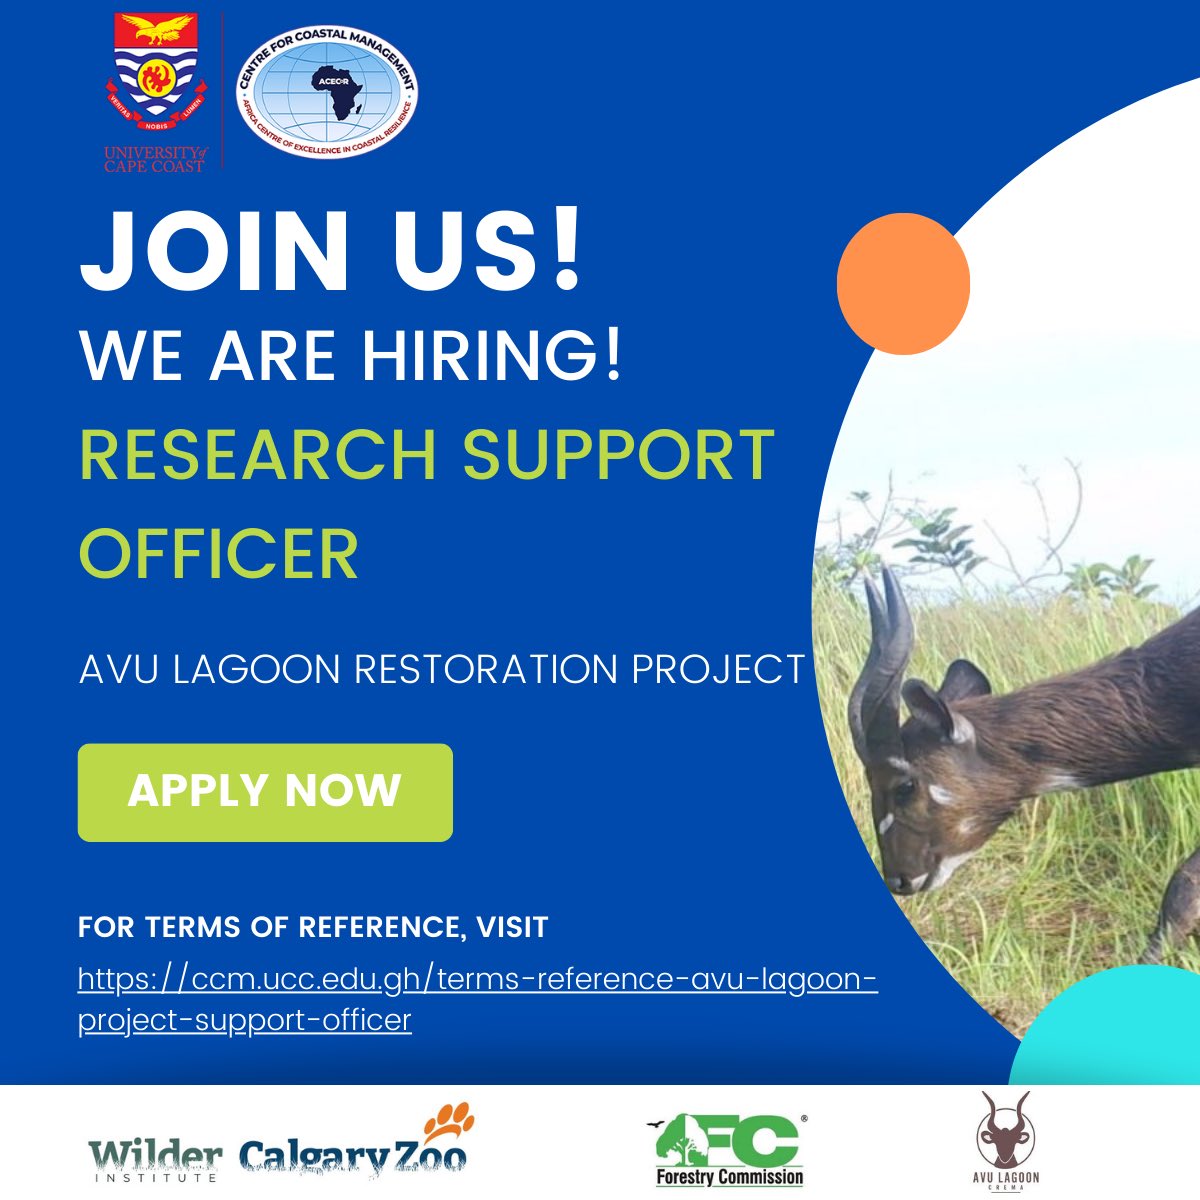 The Avu Lagoon Restoration project through @ccm_ucc is searching for a meticulous and supportive Research Support Officer to join our team. Be part of an exciting project ! Apply today! Click 👇🏽for more information on requirements and how to apply ccm.ucc.edu.gh/terms-referenc…